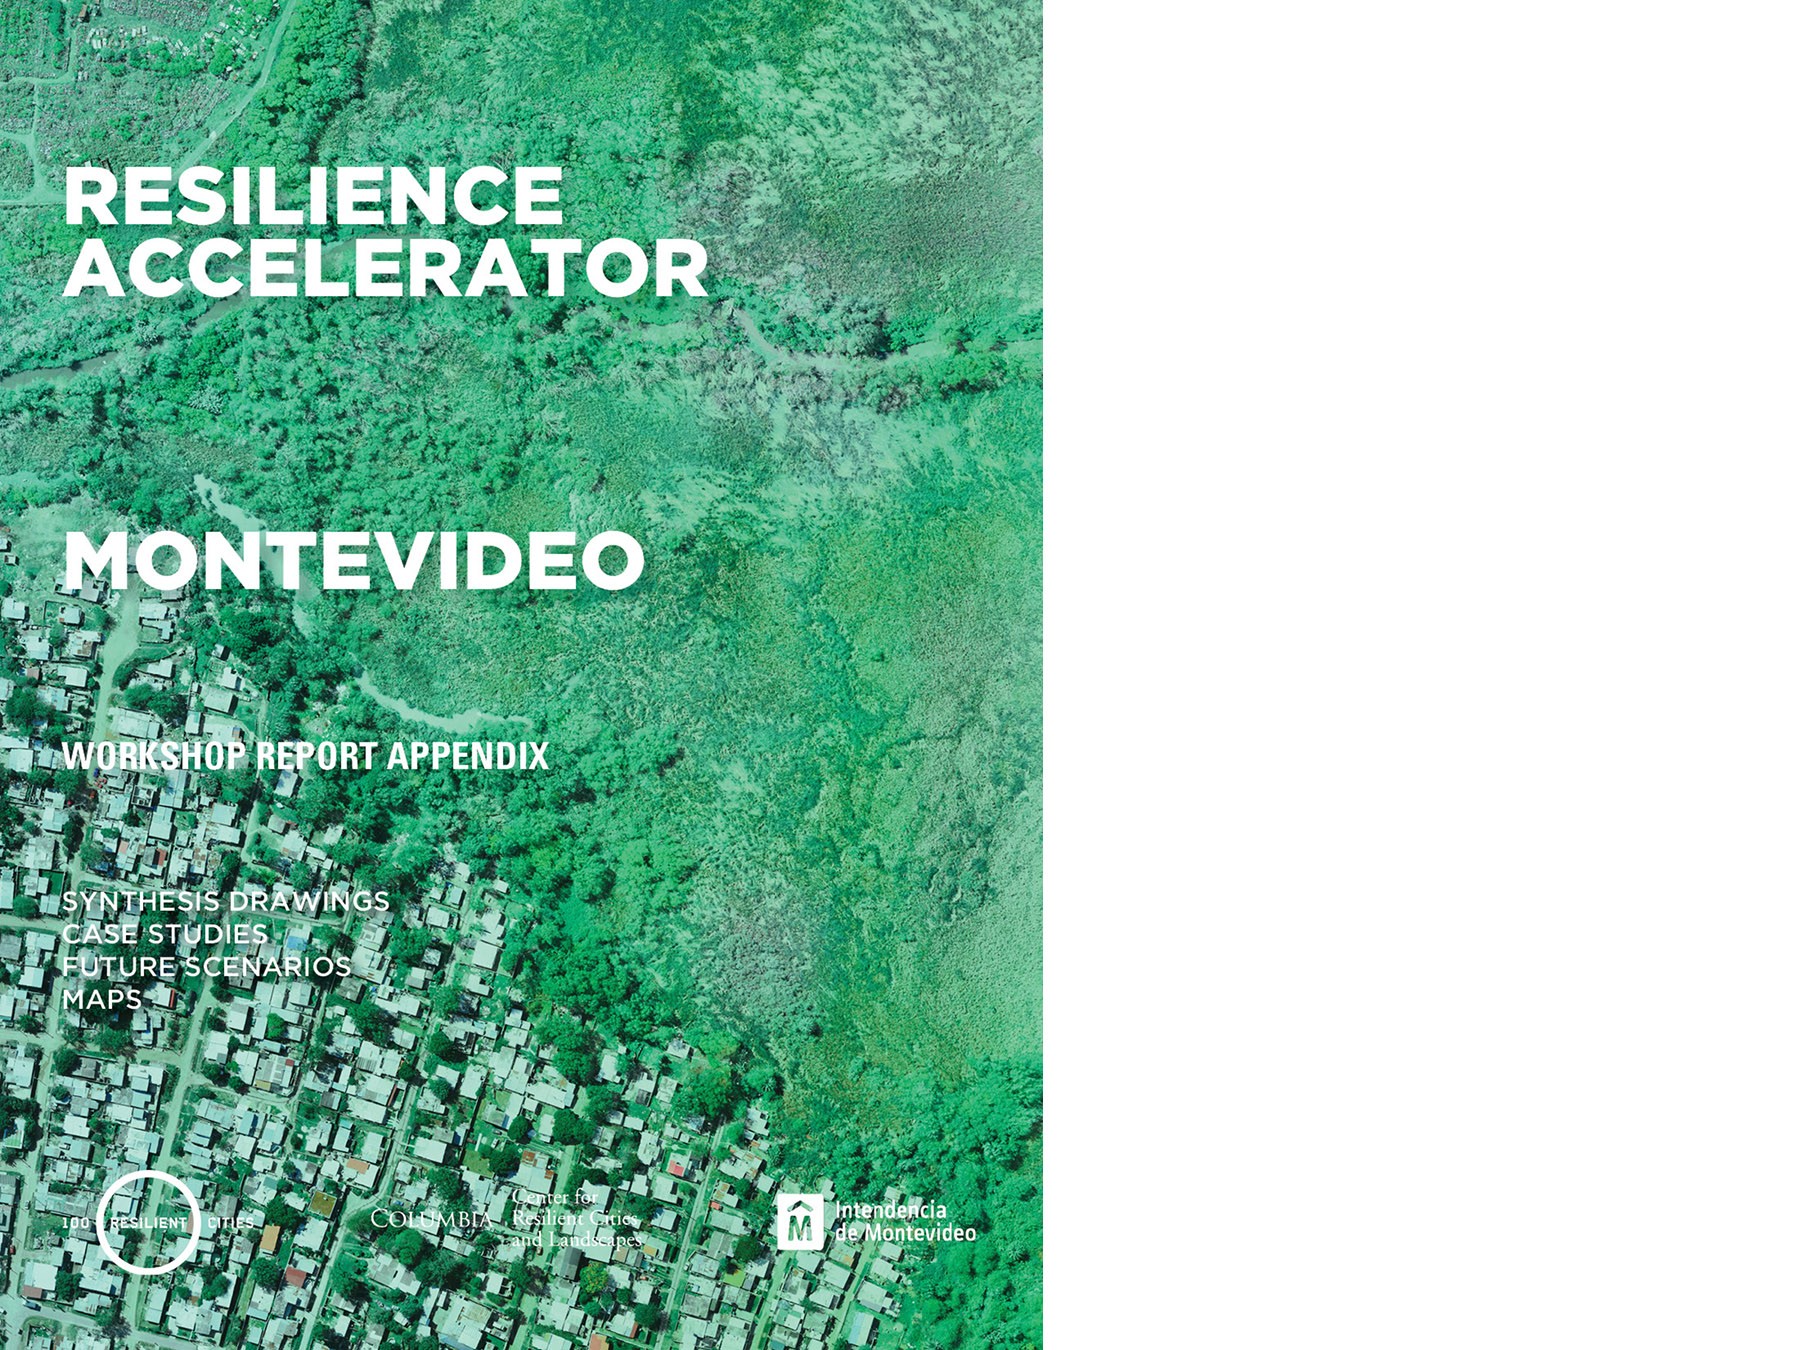 Resilience Accelerator Montevideo Report Appendix Cover